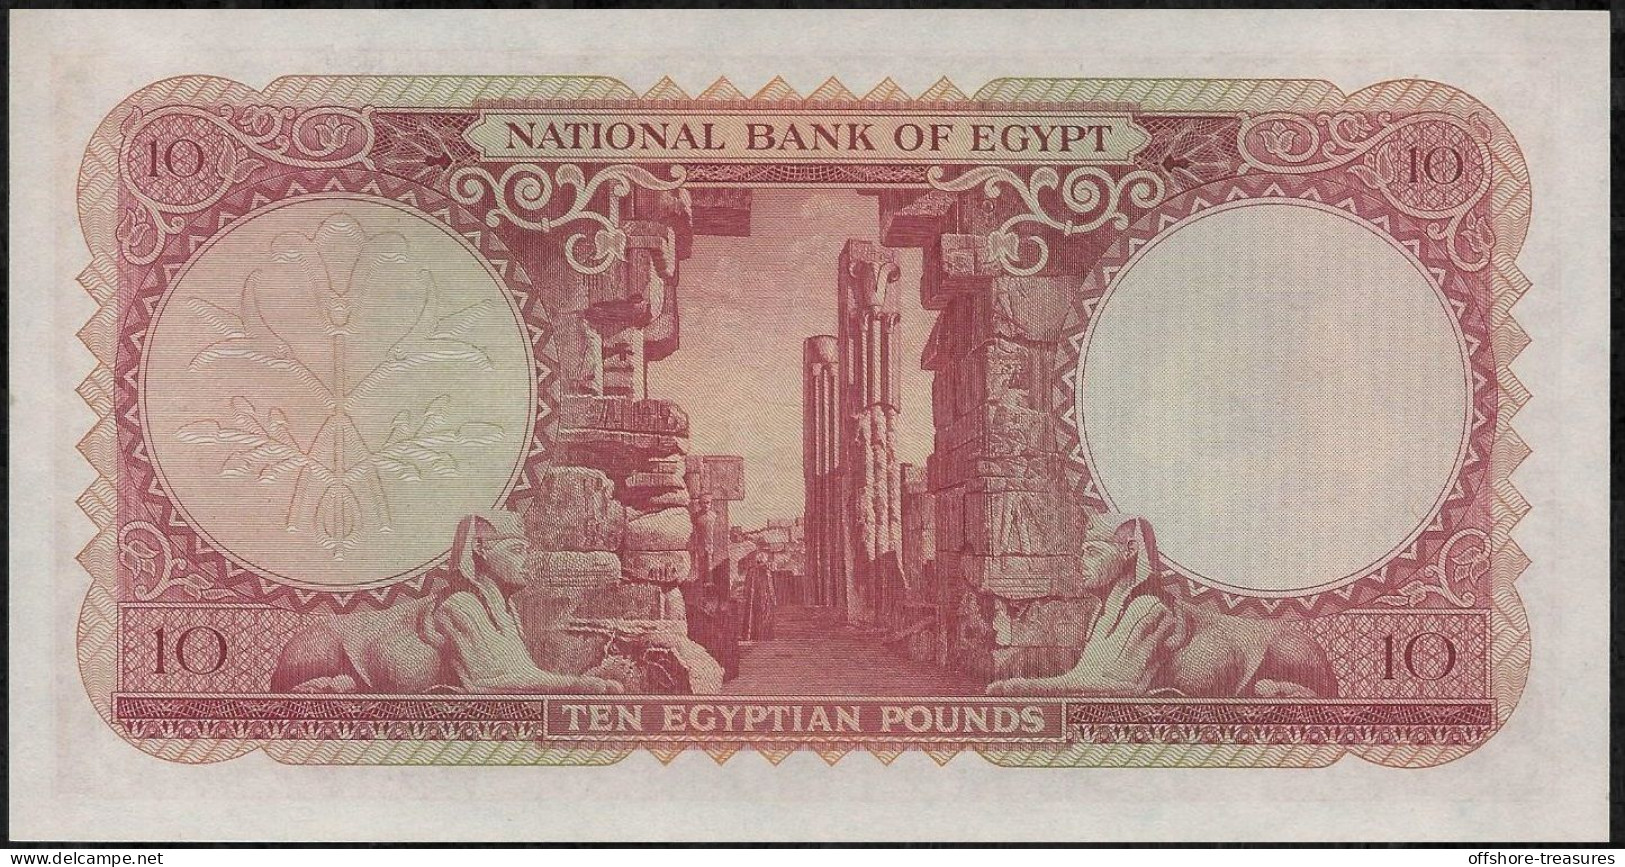 Egypt 10 POUNDS 1955 UNC National Bank KING TUT RED Banknote Sign Ahmed Zaki Saad RARE Grade Pick 32B - Egypt